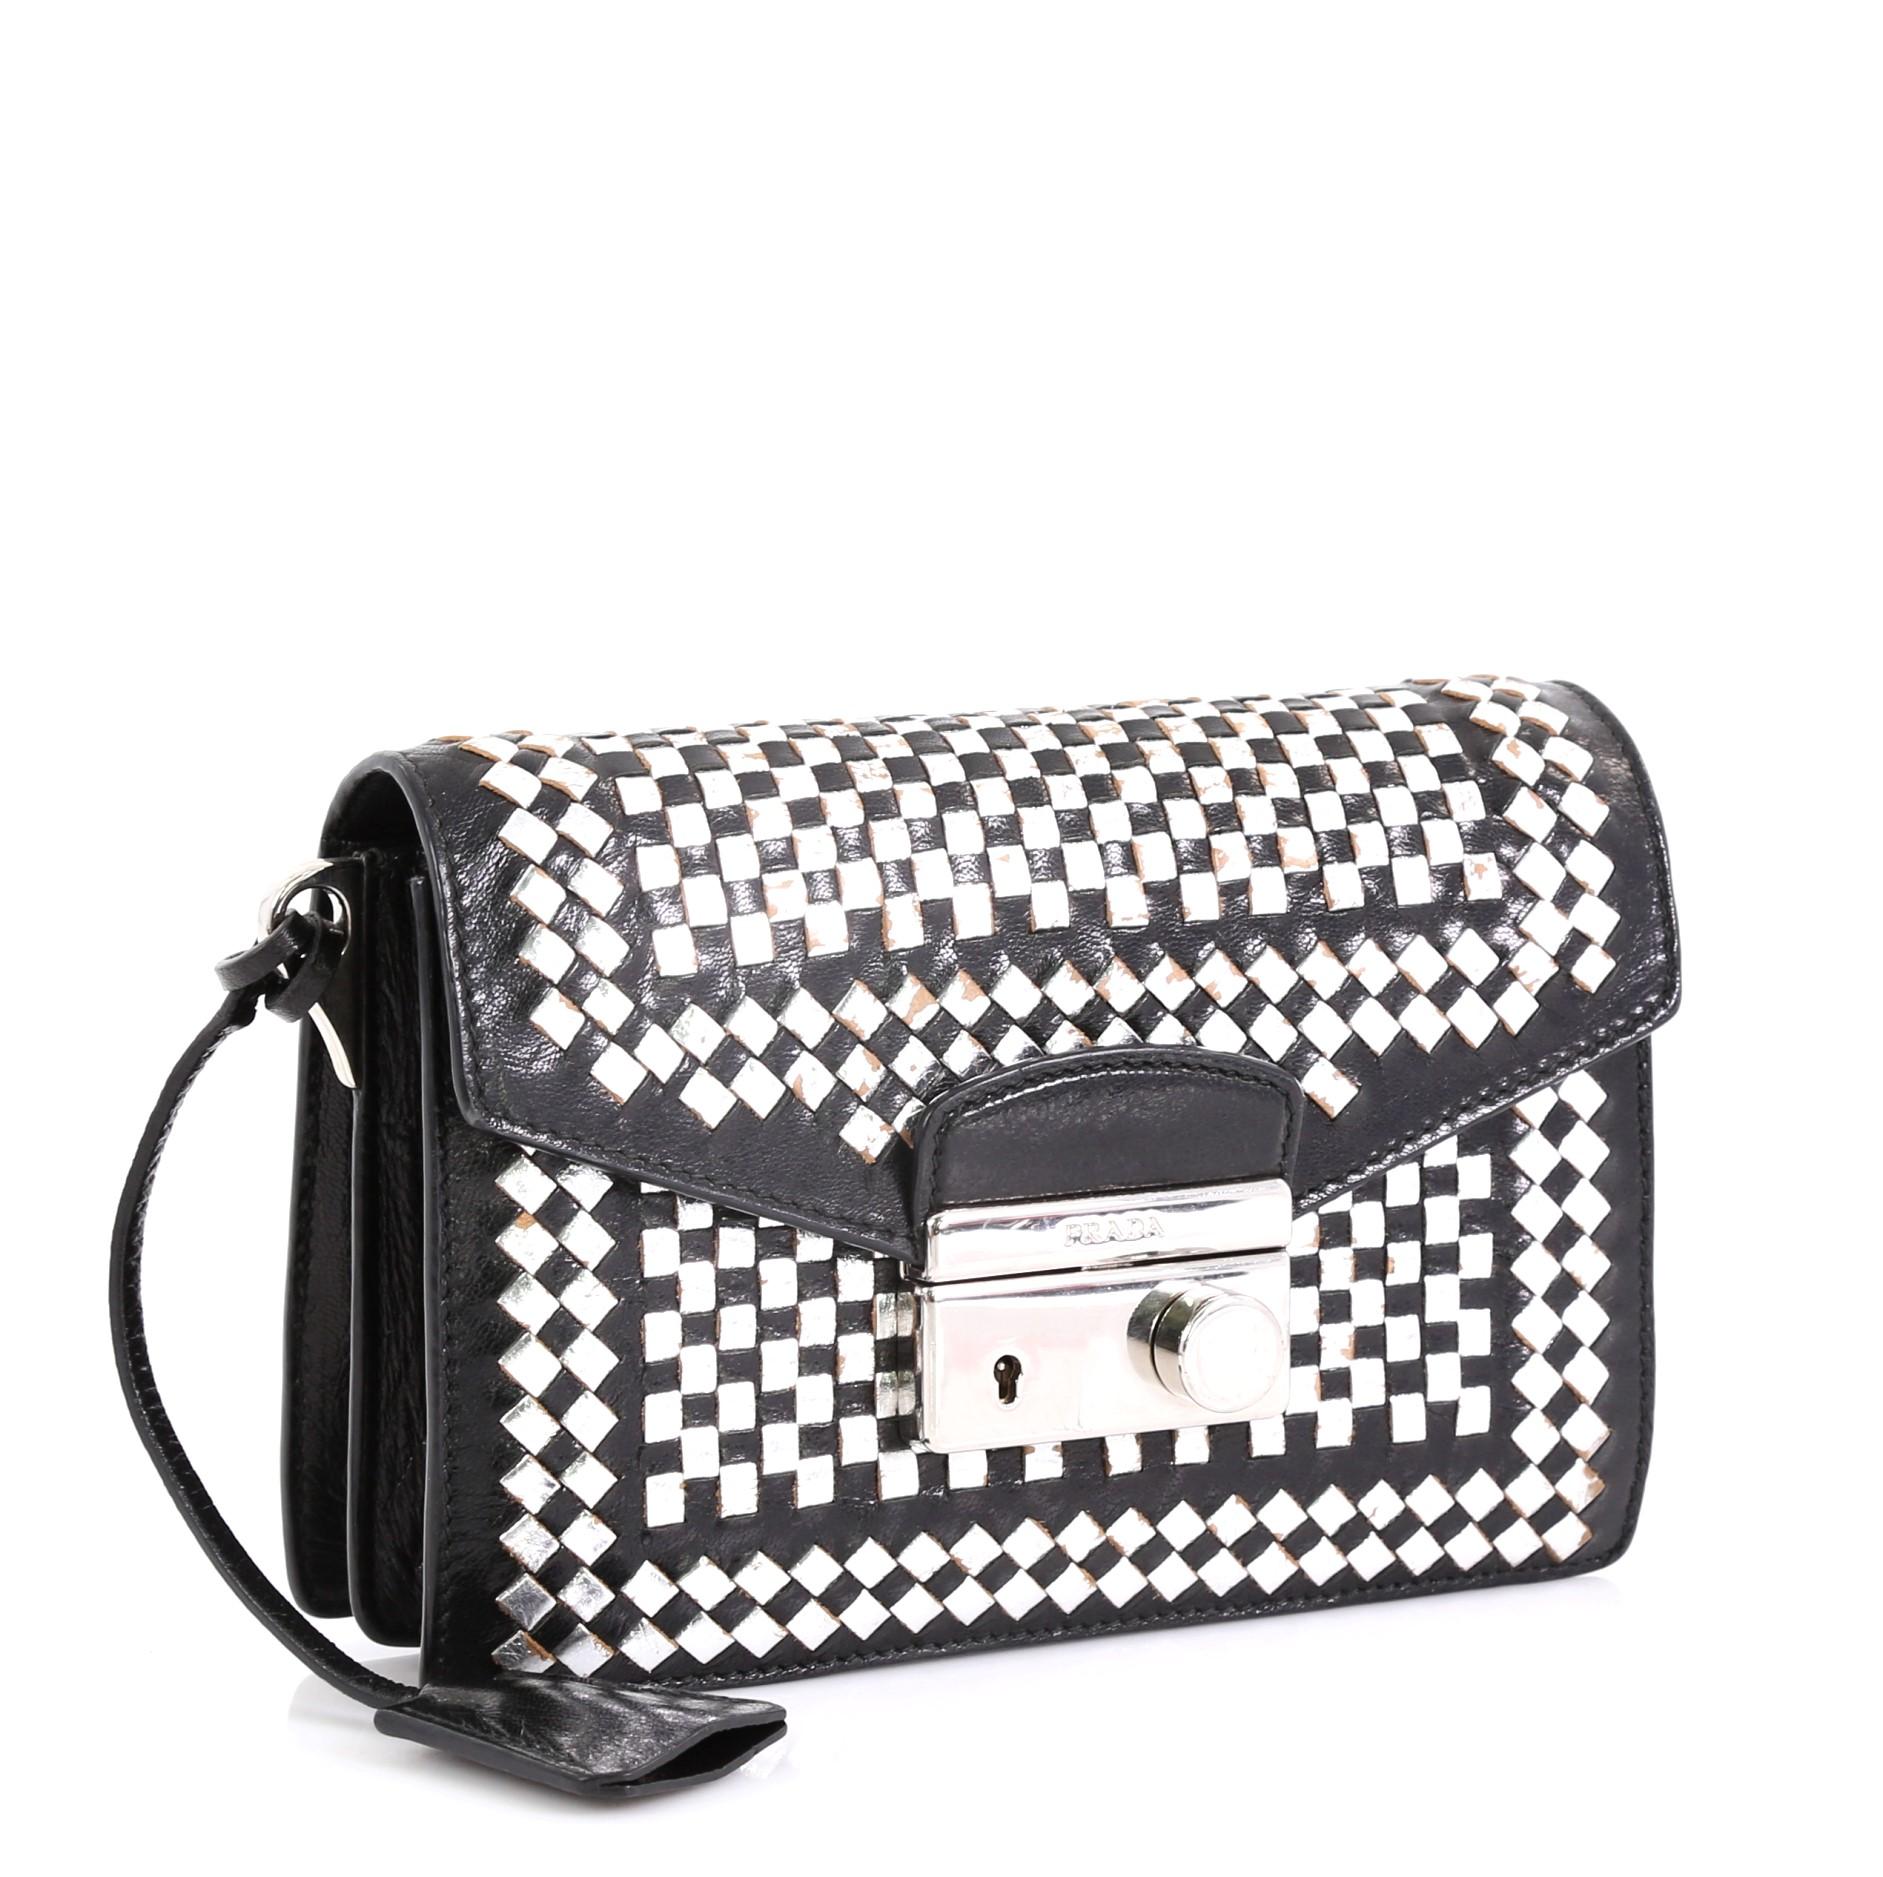 This Prada Sound Bag Woven Leather Mini, crafted in silver and black woven leather, features an adjustable shoulder strap and silver-tone hardware. Its flap with press-lock closure opens to a black leather interior with flap and slip pockets.